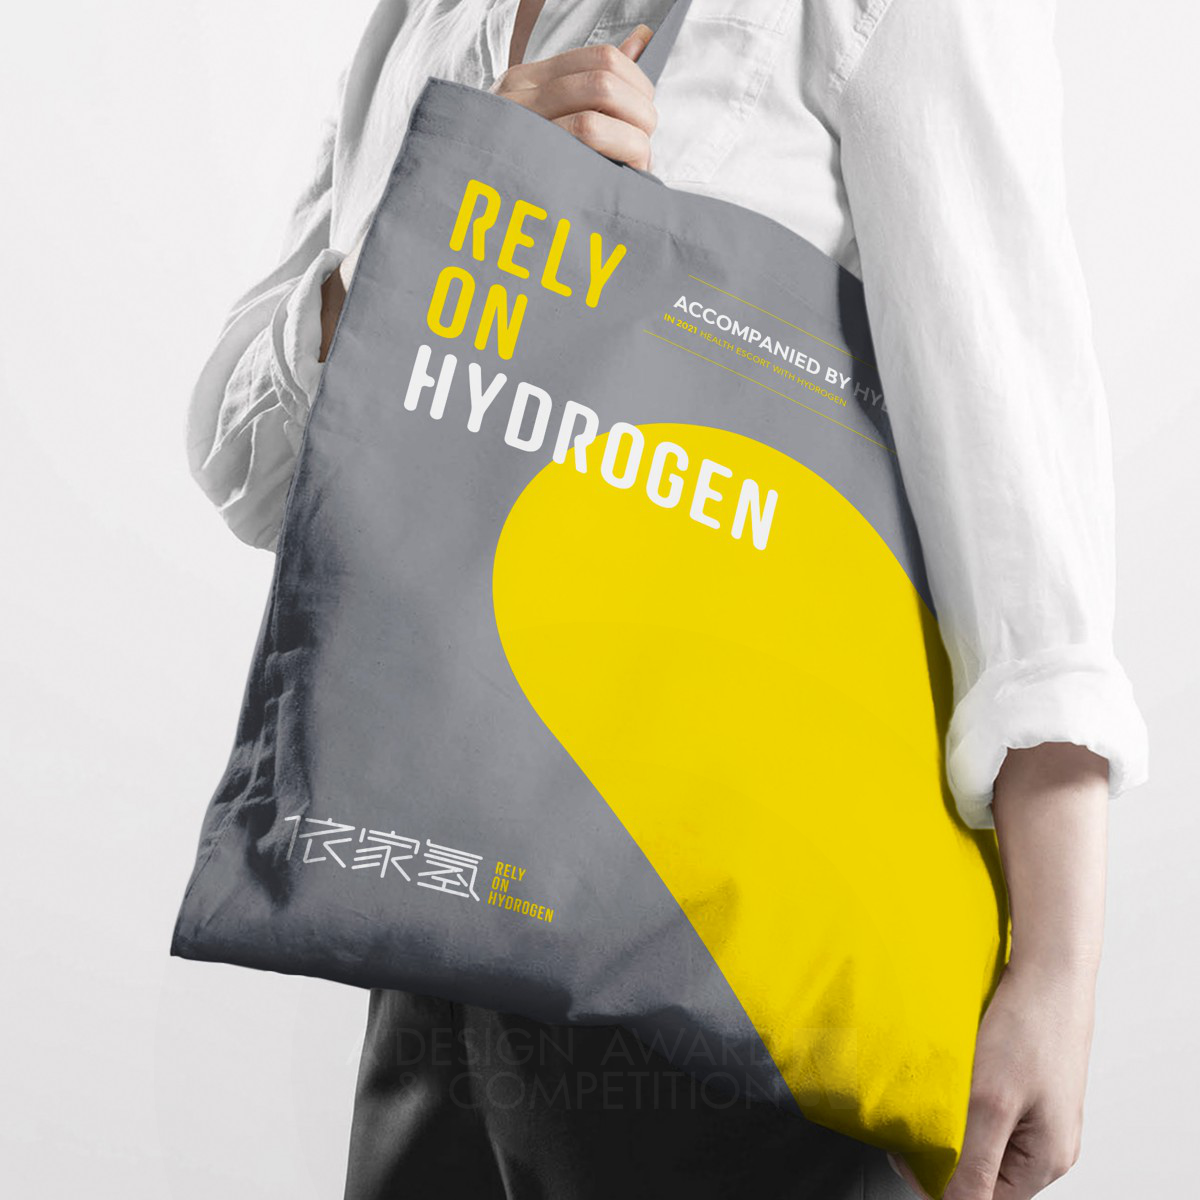 Rely on Hydrogen Corporate Identity by Guangzhou Cheung Ying Design Co., Ltd.